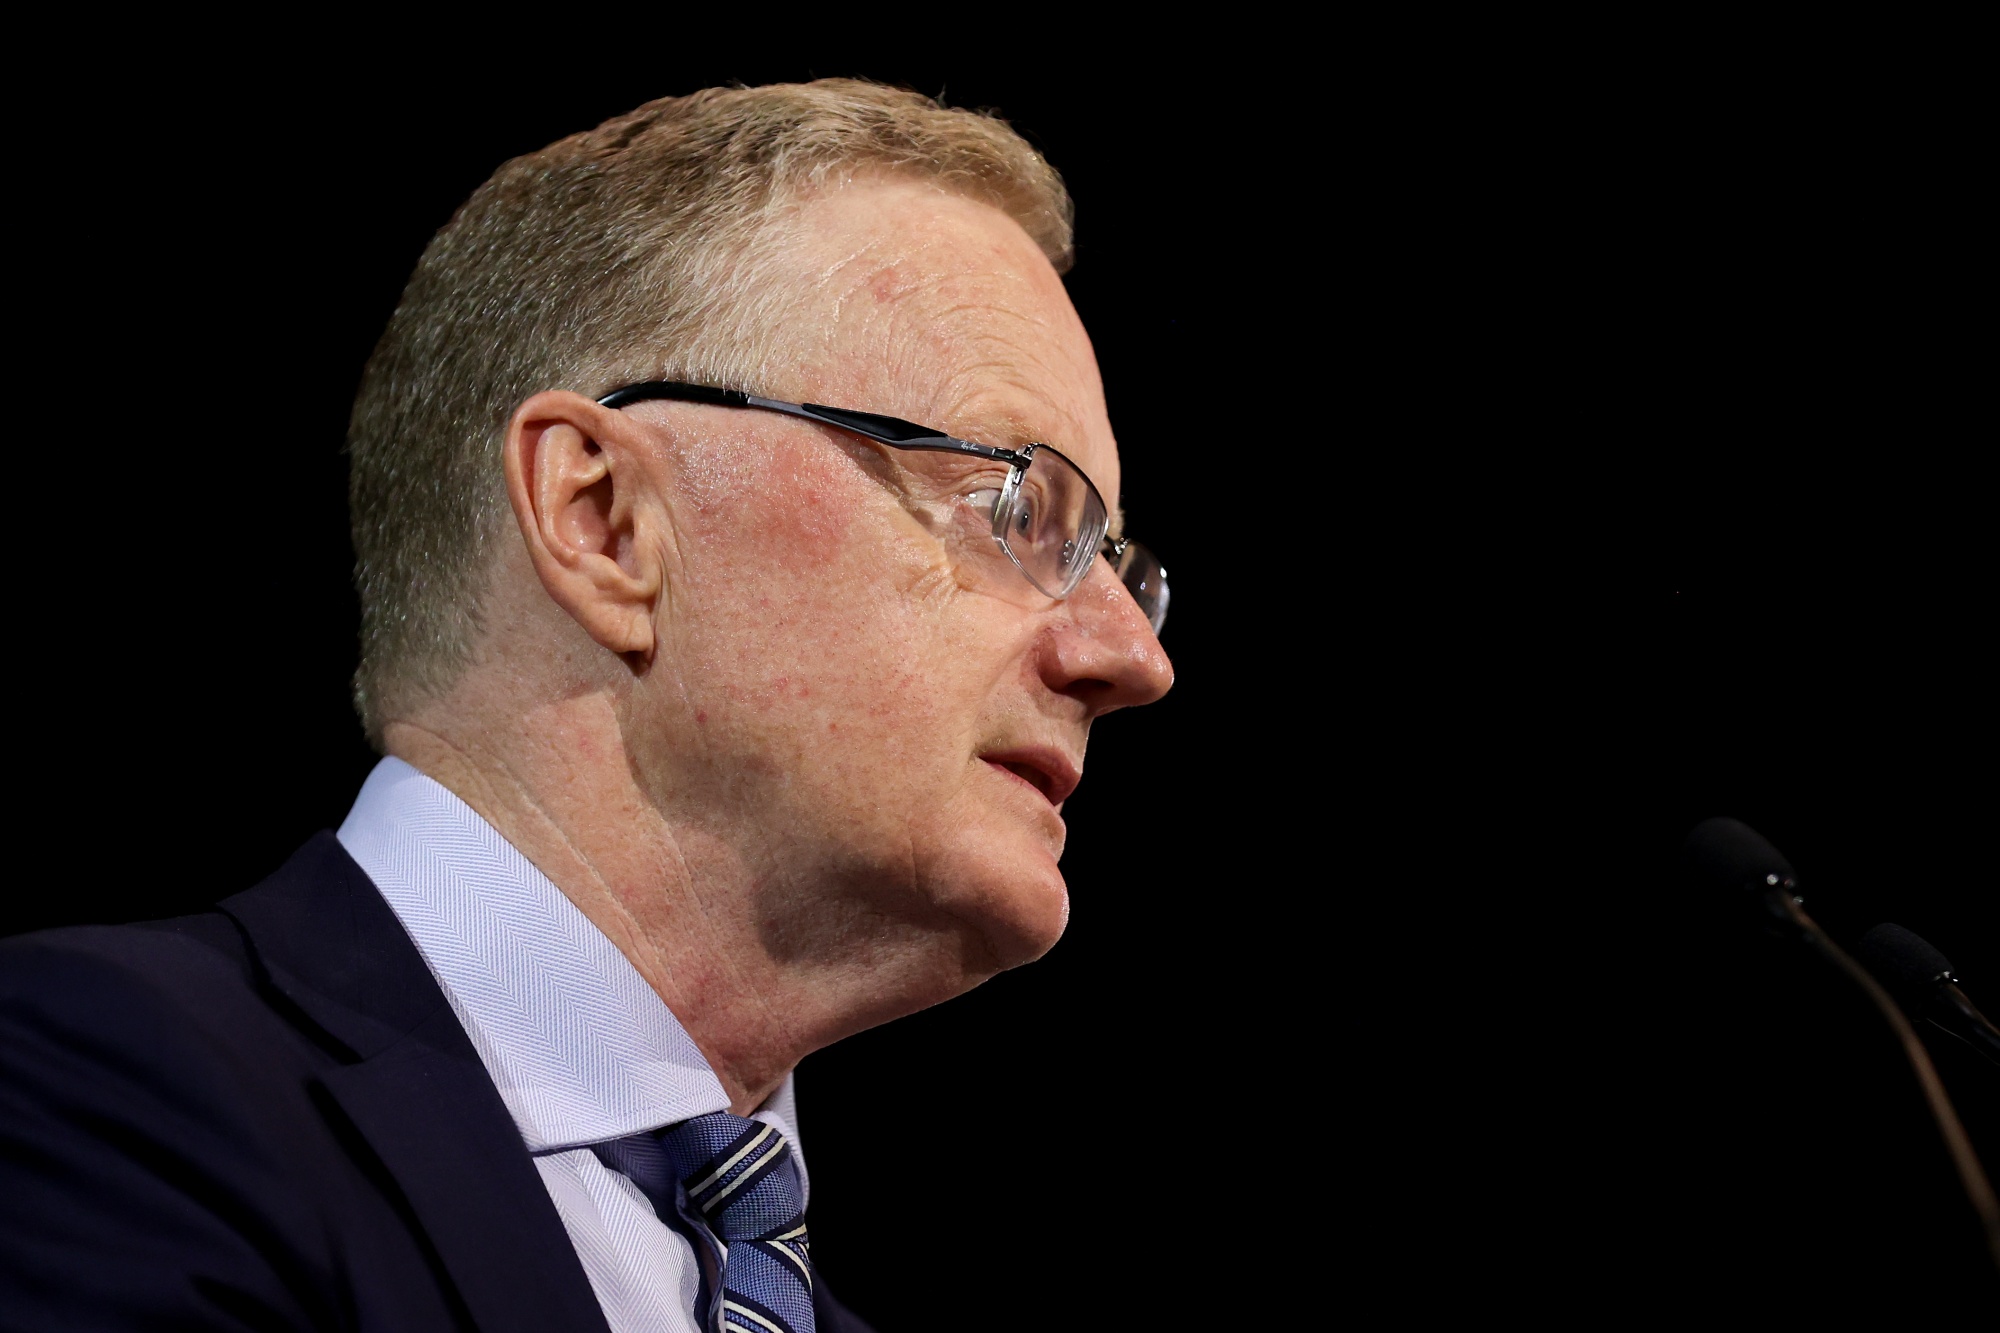 RBA Governor Philip Lowe's Inflation Record Is Enviable - Bloomberg